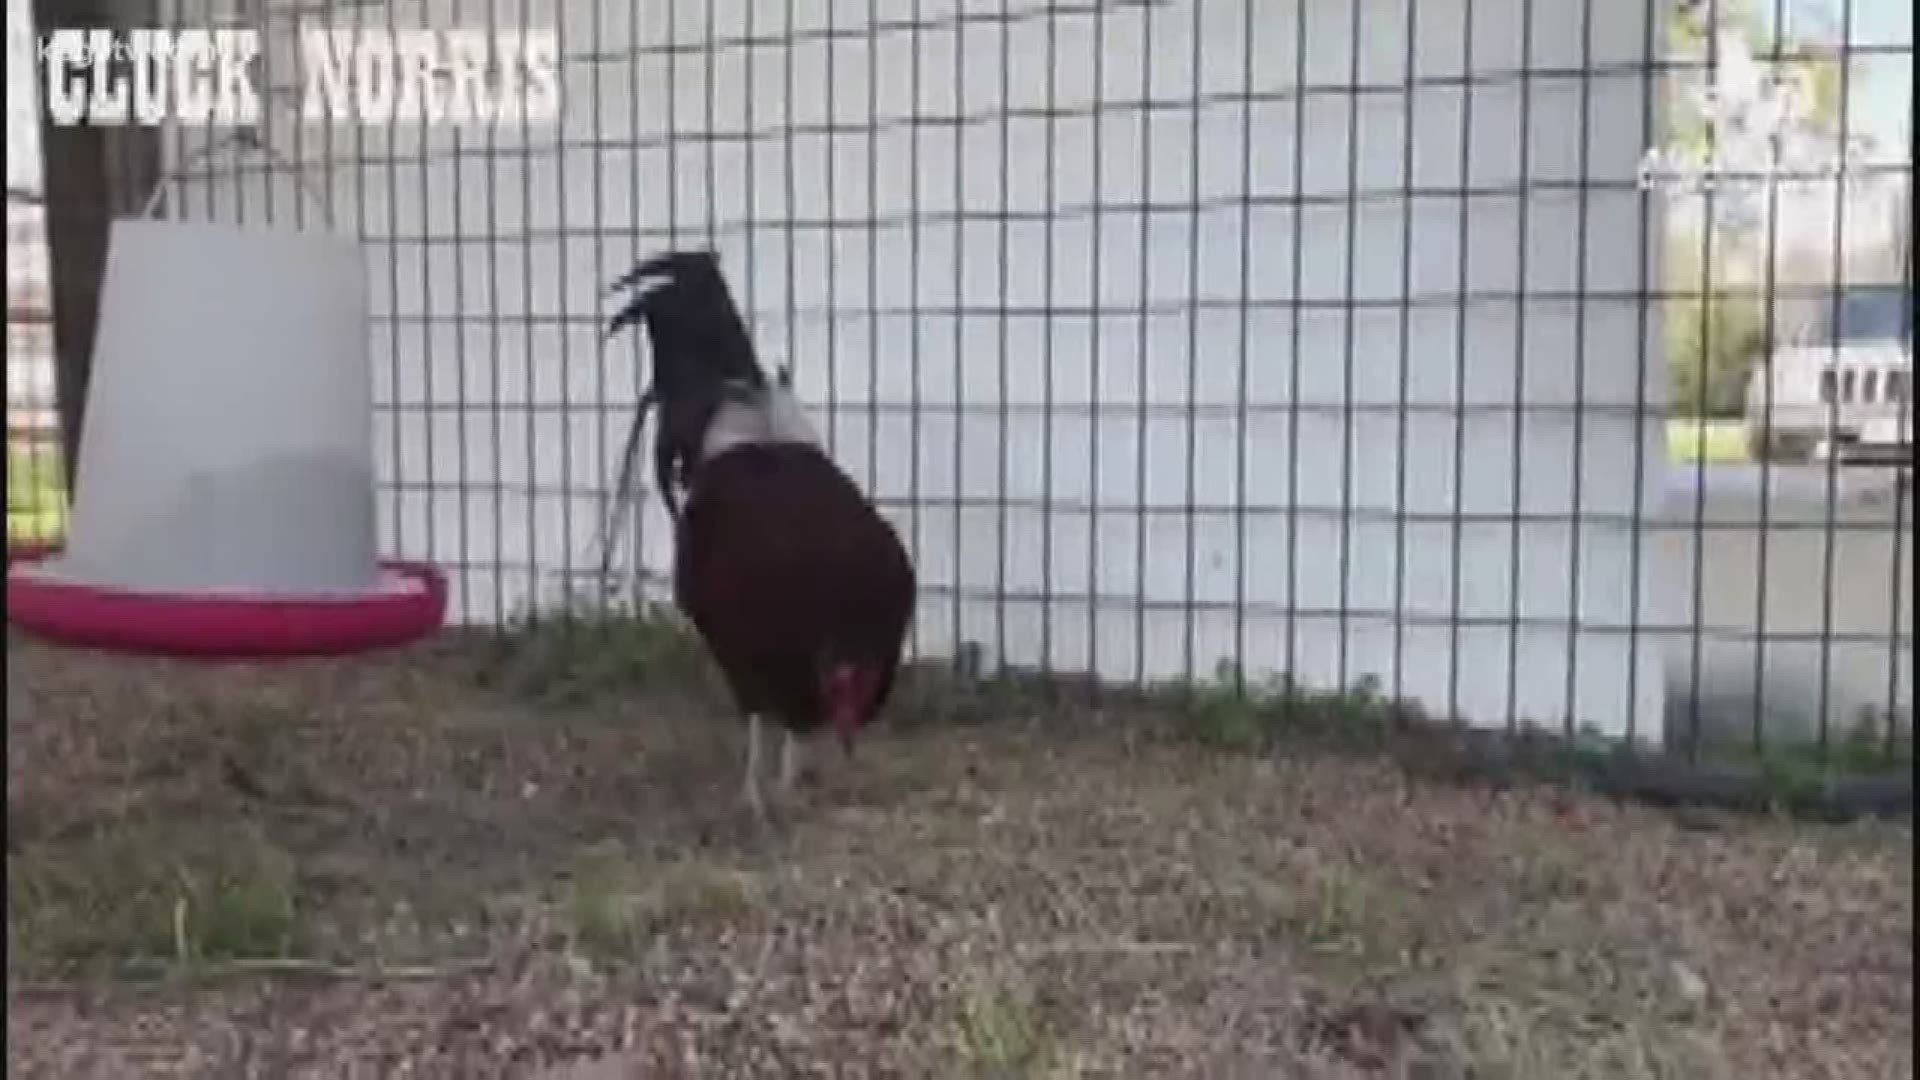 Creative thinking by Aggieland Humane Society staff helps rooster find his new flock.